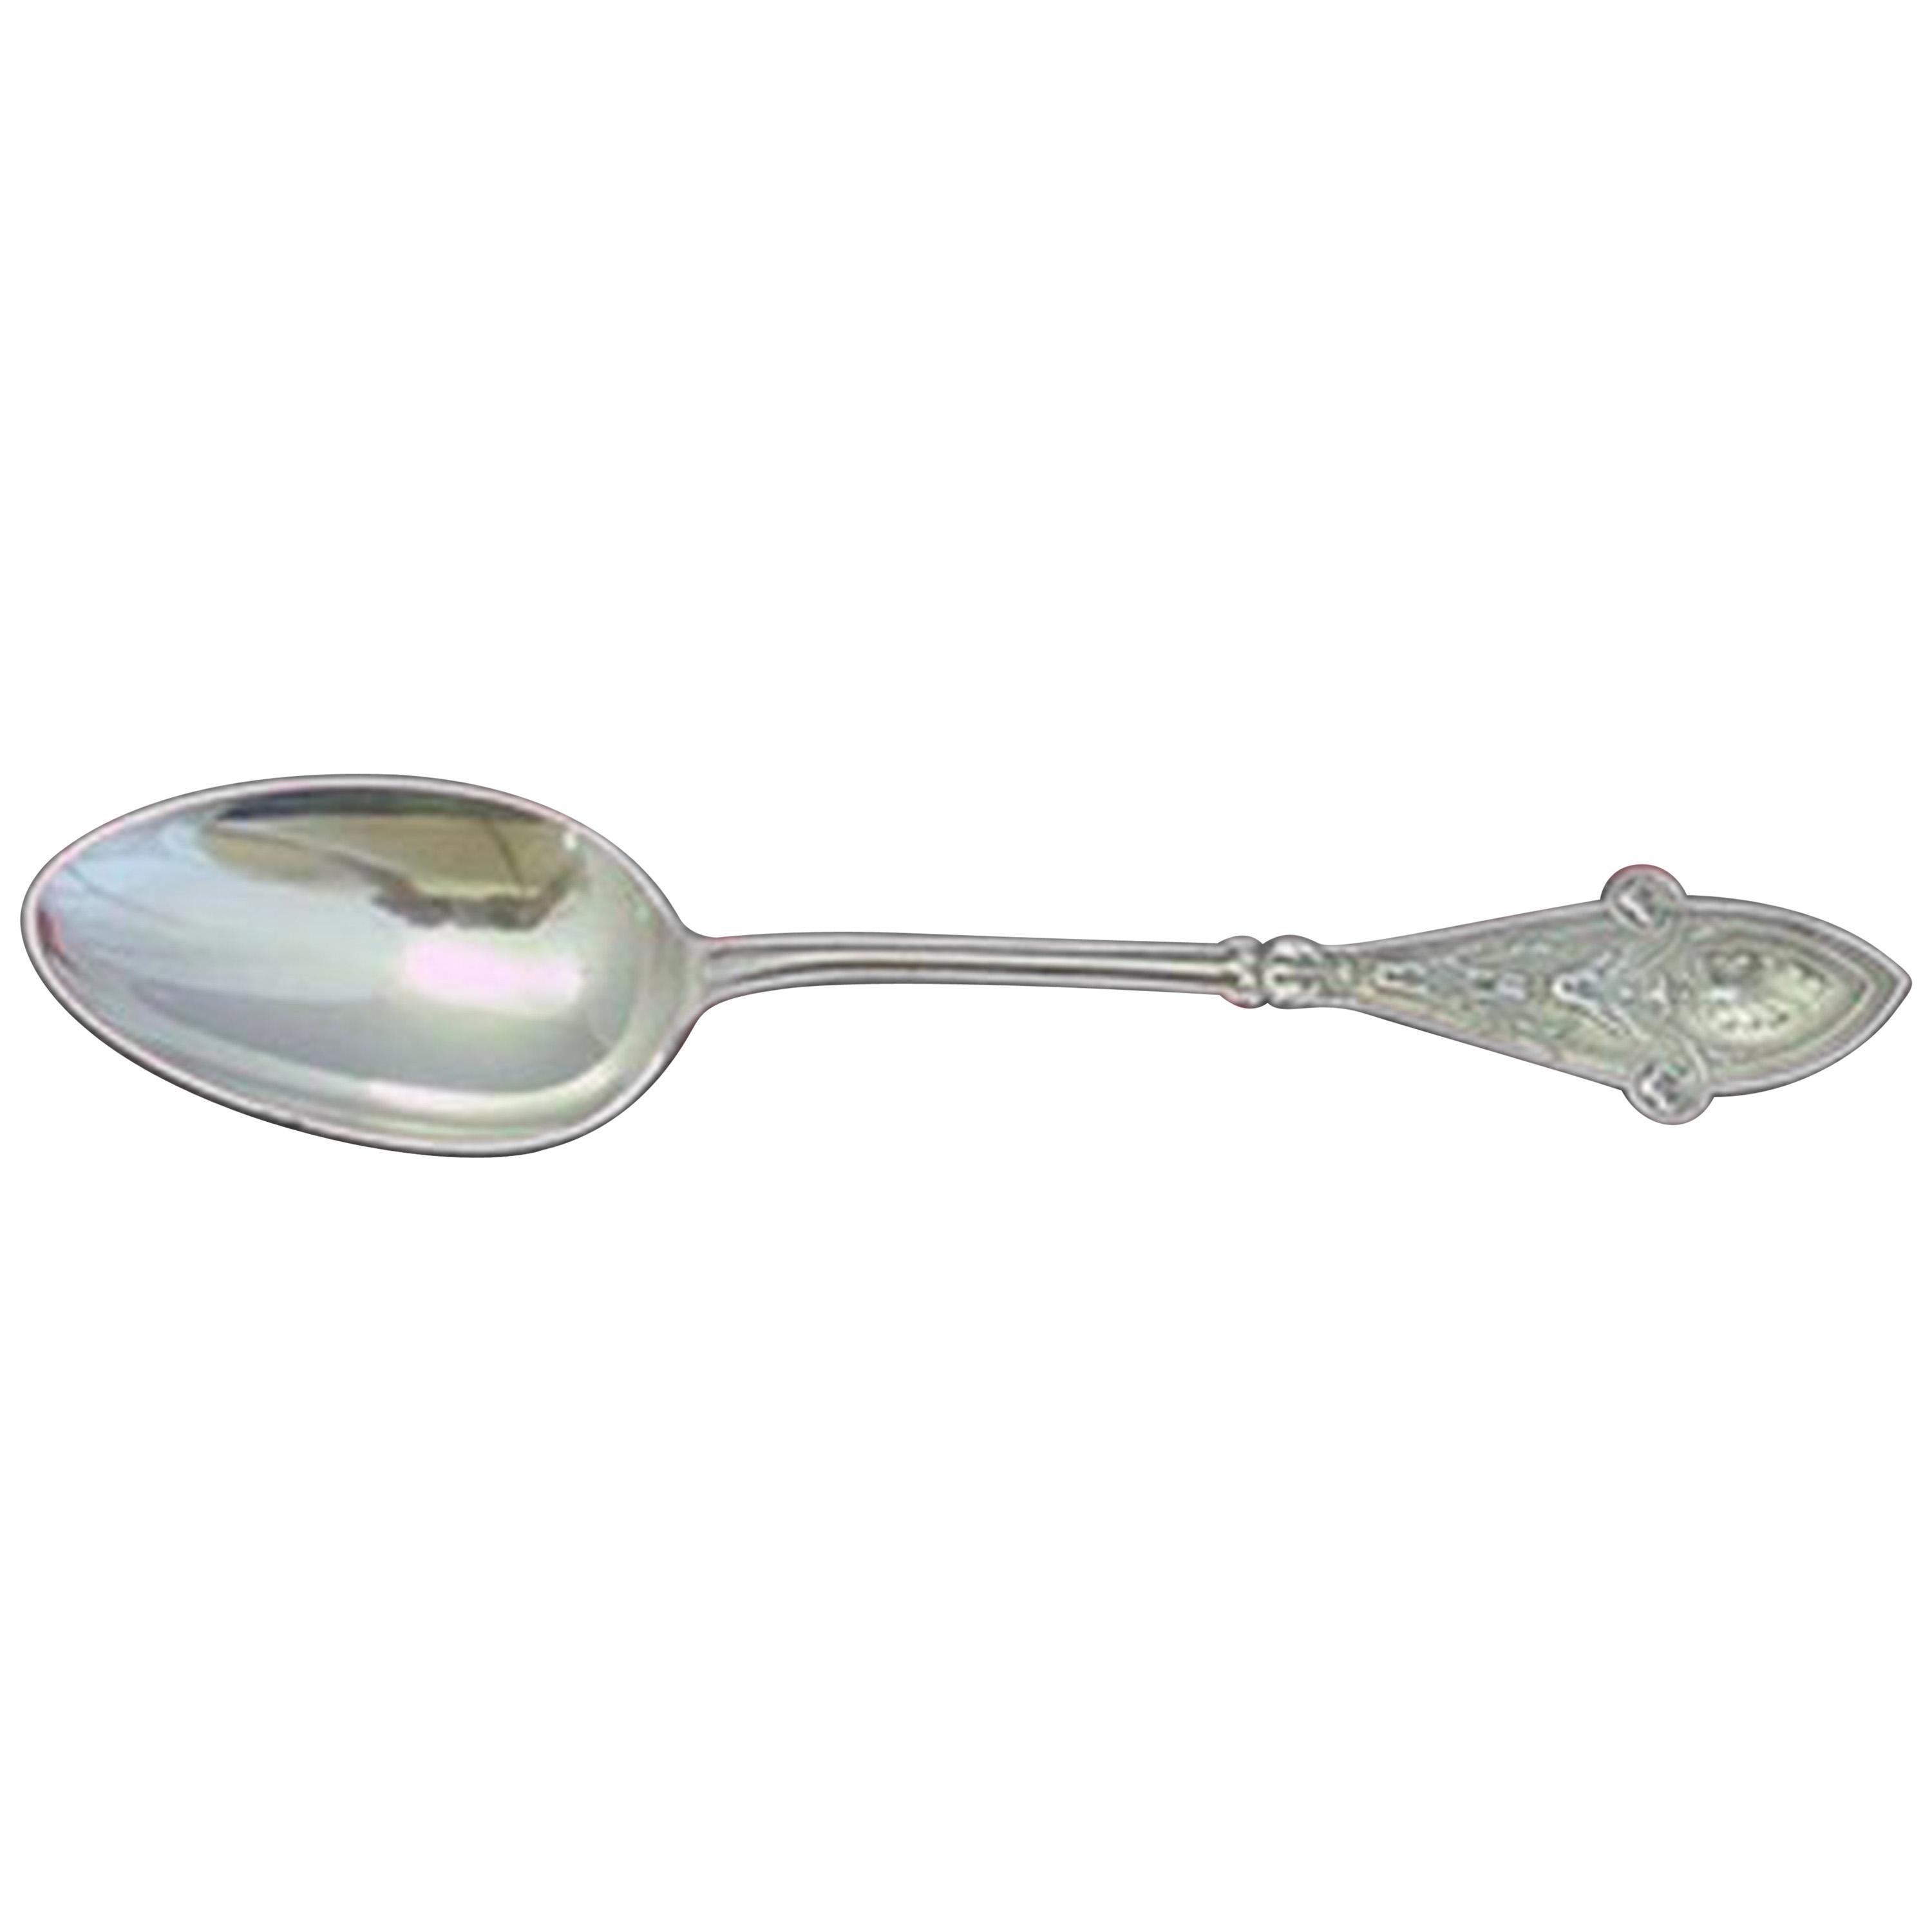 Italian by Tiffany and Co Sterling Silver Serving Spoon Antique